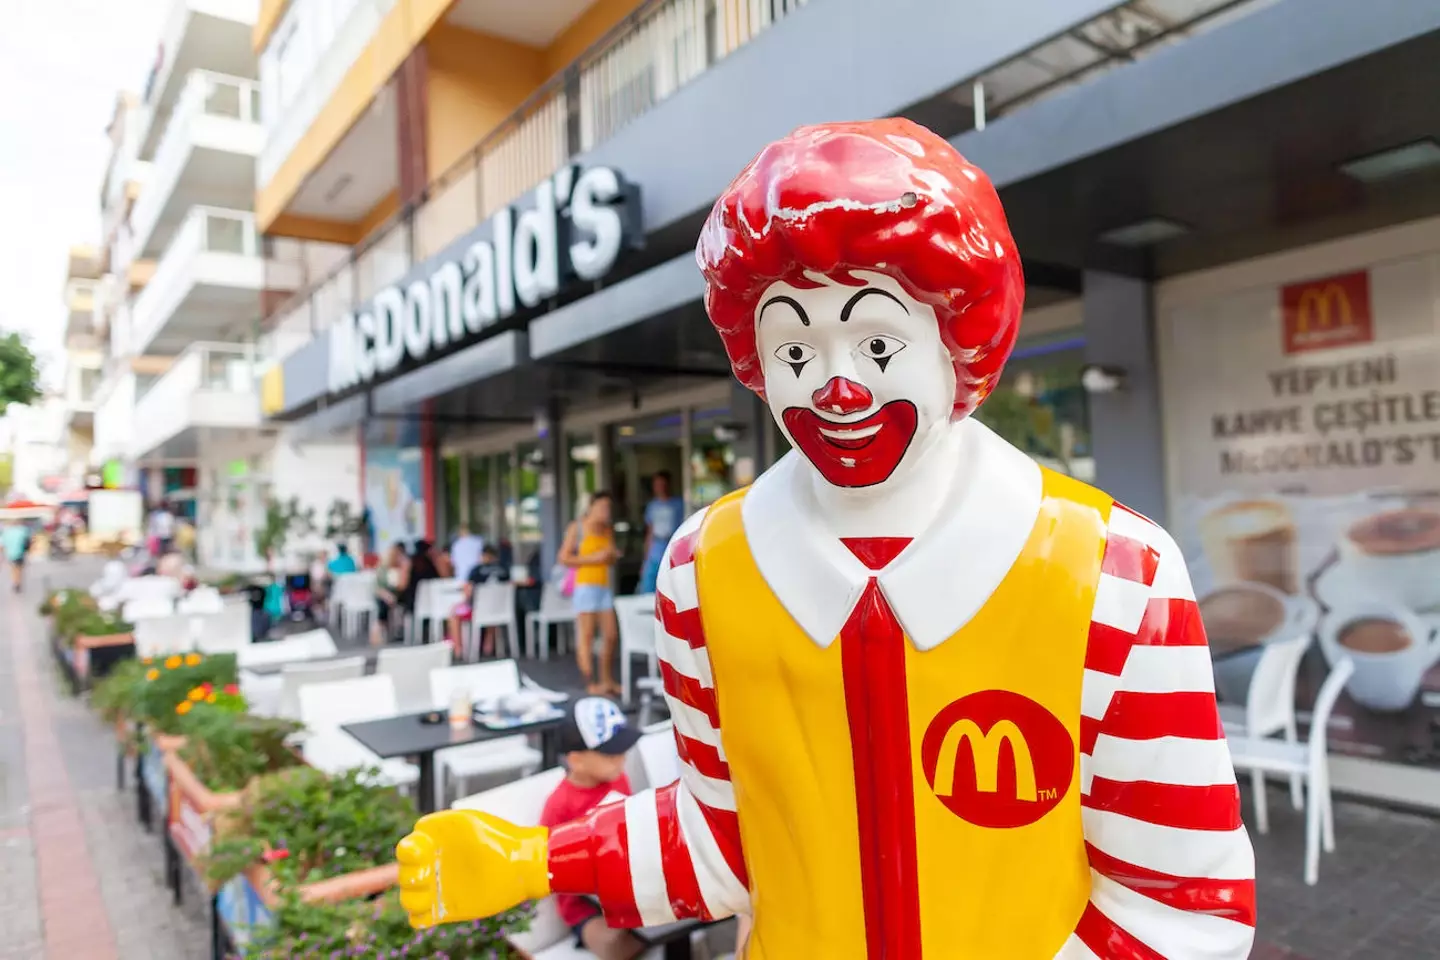 It turns out Ronald's absence is linked to the 'killer clown craze' that happened back in 2016.